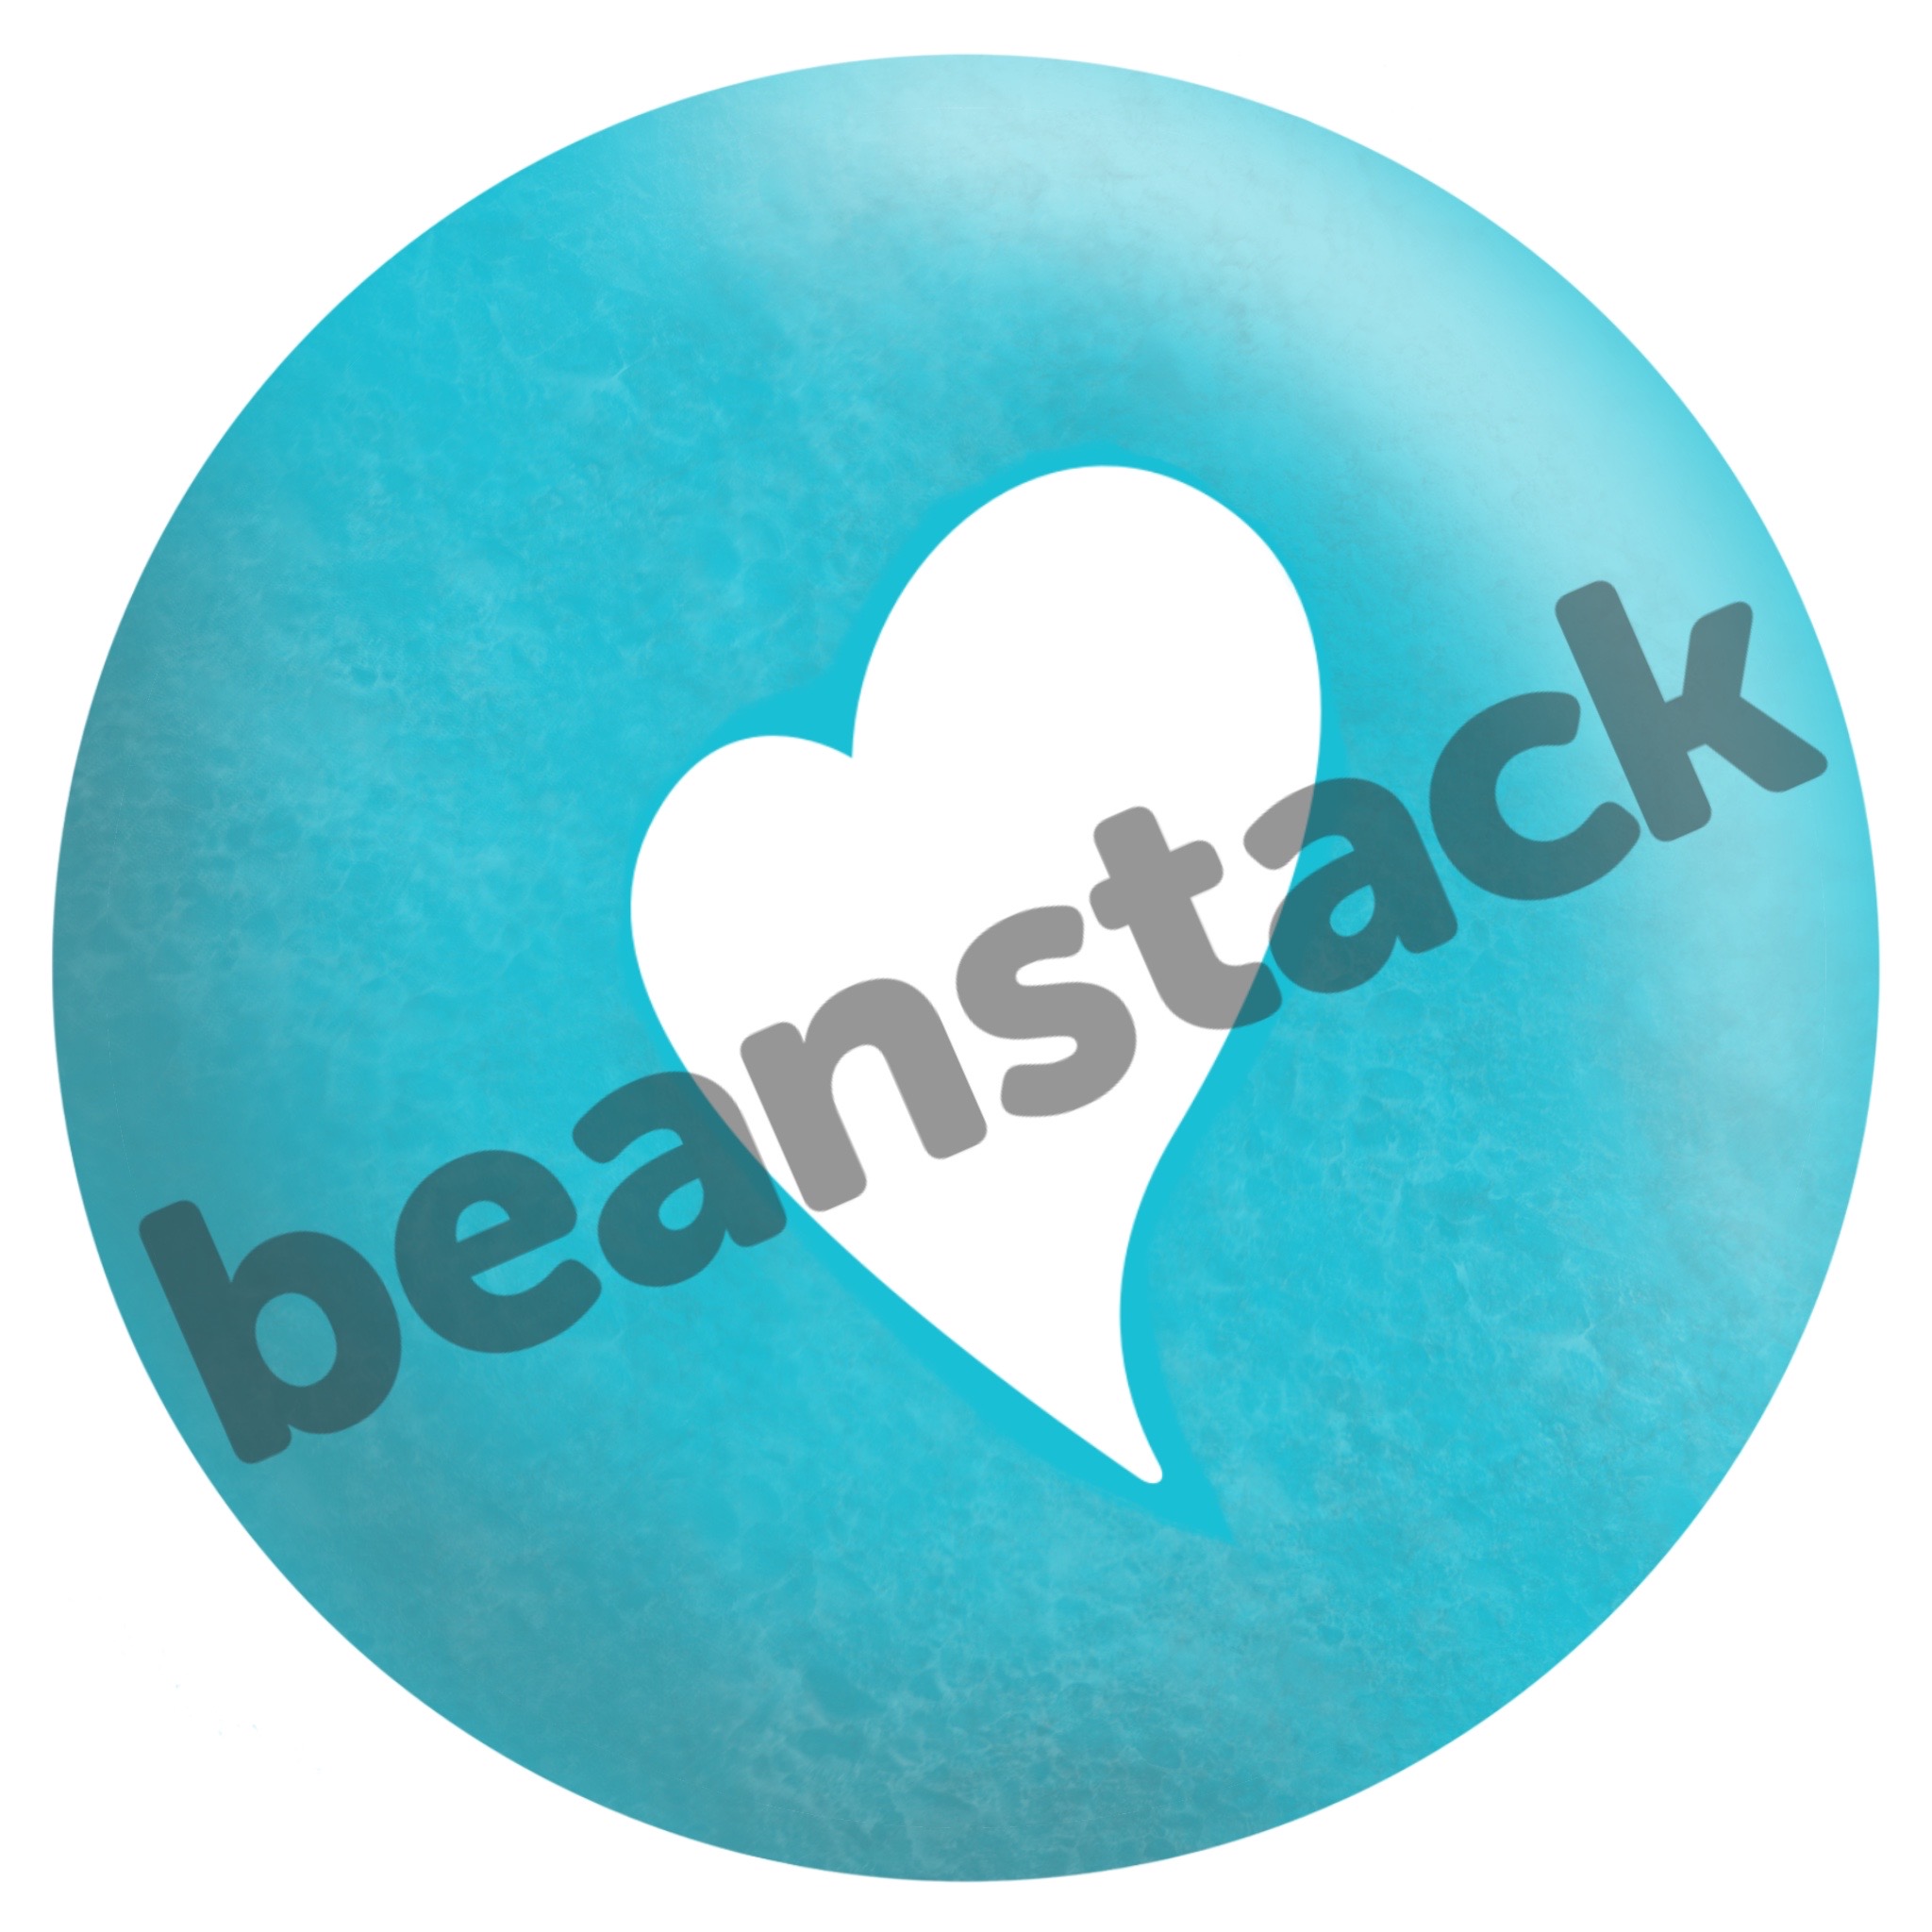 Beanstack is a web and mobile app used to track independent reading time, and help build a love of reading. It's an easy way to keep track of all the books you and your whanau read.